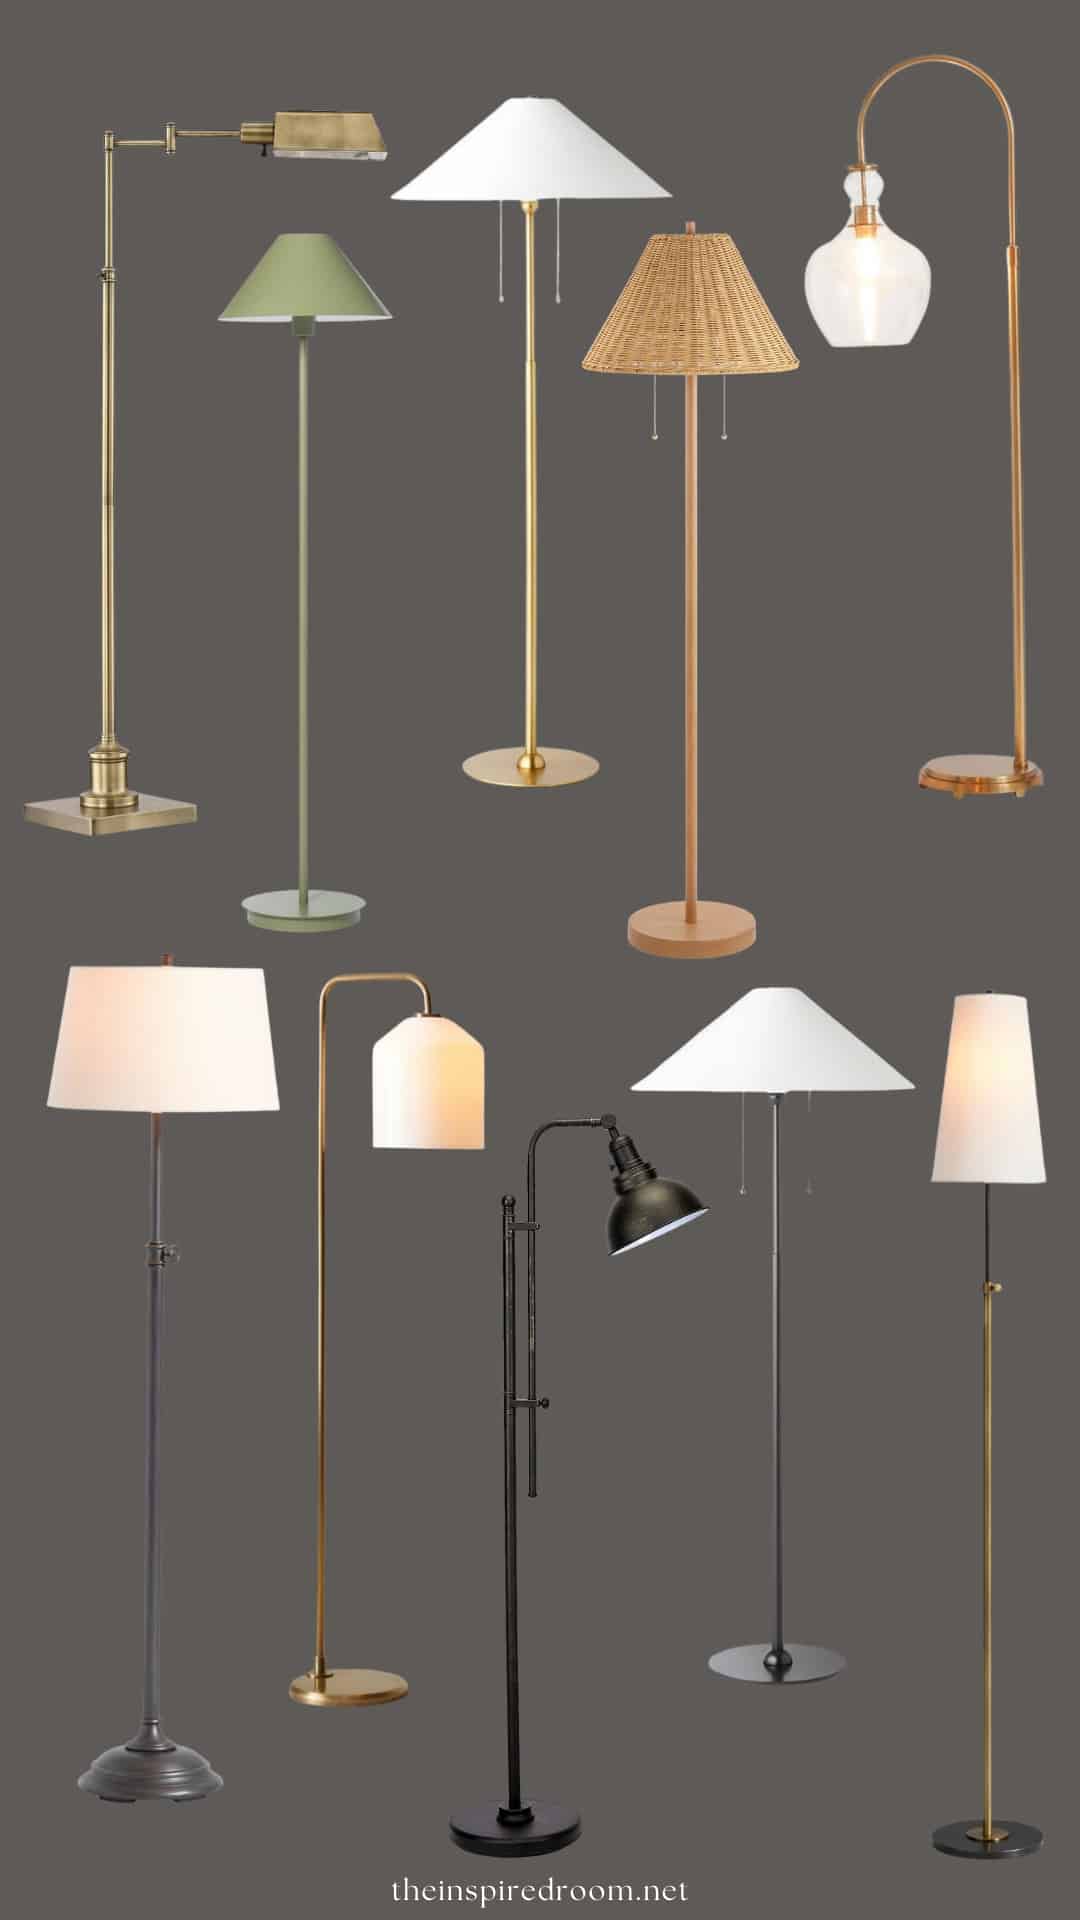 Floor Lamps: Our Favorite Styles!